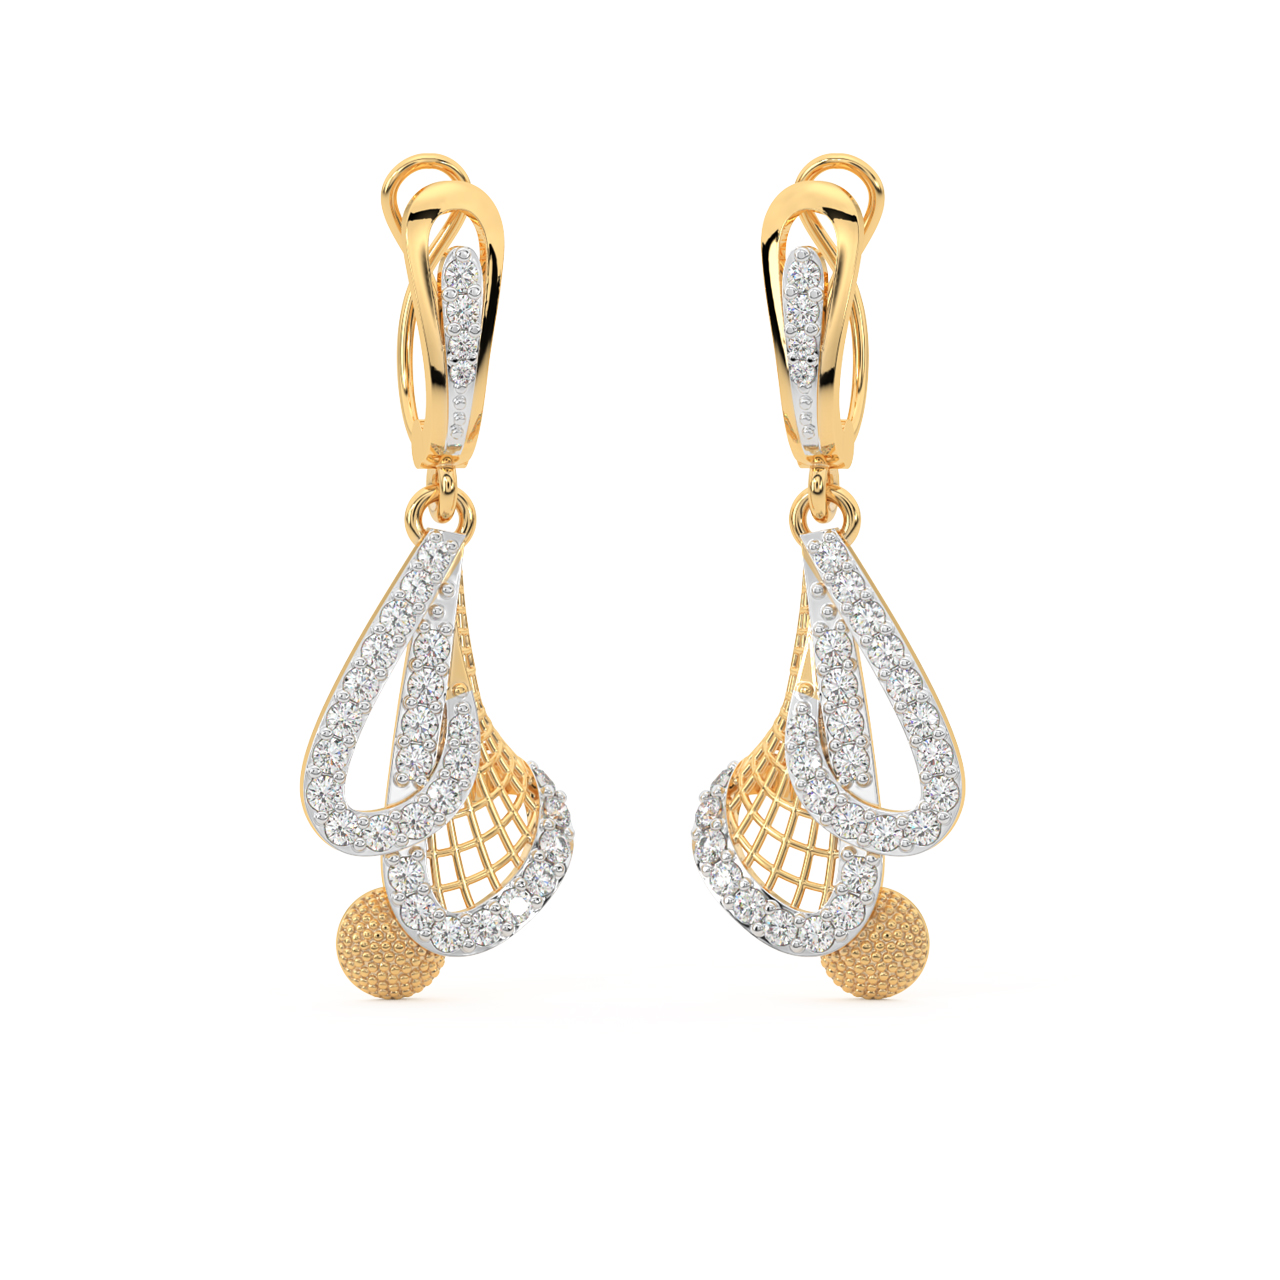 5 Latest Earring Designs That You Would Love